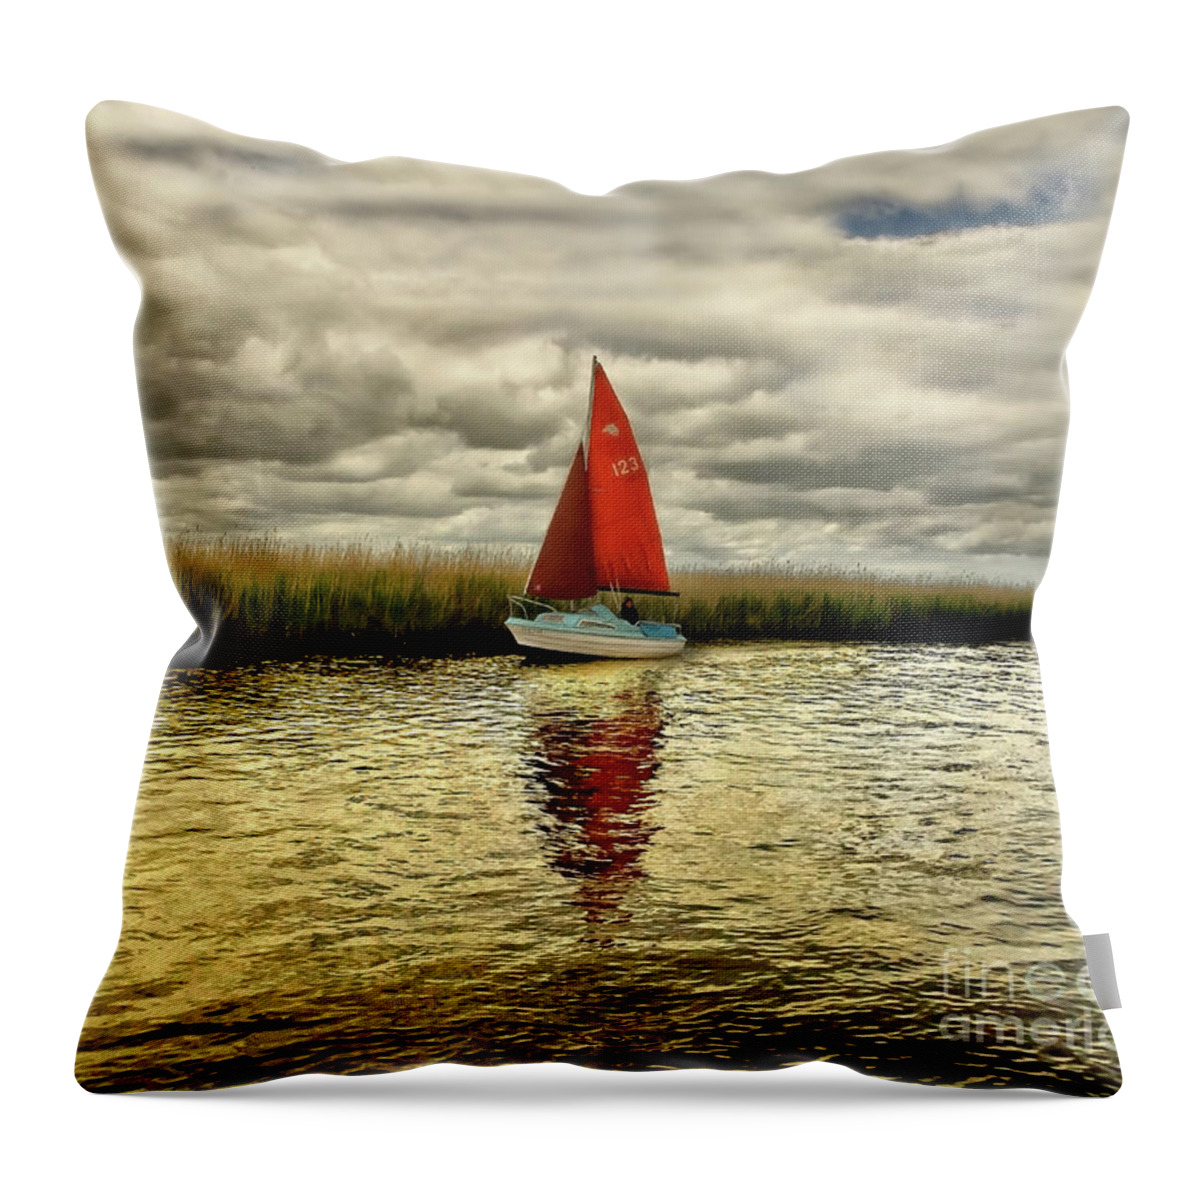 Red Blue Gold Yellow Sail Water Sailor Sailing Calm Beautiful Lake River Reeds Happy Joy Joyful Solo Single Alone Relaxing Romantic Atmospheric Solitude Clouds Colorful Color Boat Reflections Serene Solitary Tranquil Tranquillity Elements Vibrant Timeless Still Calmness Peaceful Breathtaking Mind-blowing Nature Bright Vivid Golden Patterns Surf Way Charming Relaxation Painterly Magical Sunset Dawn Delightful Serenity Cheerful Jolly Awesome Allure Seascape Simplicity Minimalism Loneliness Poetic Throw Pillow featuring the photograph Hundred shades of GOLD - RED SAIL IN GOLD WATERS by Tatiana Bogracheva